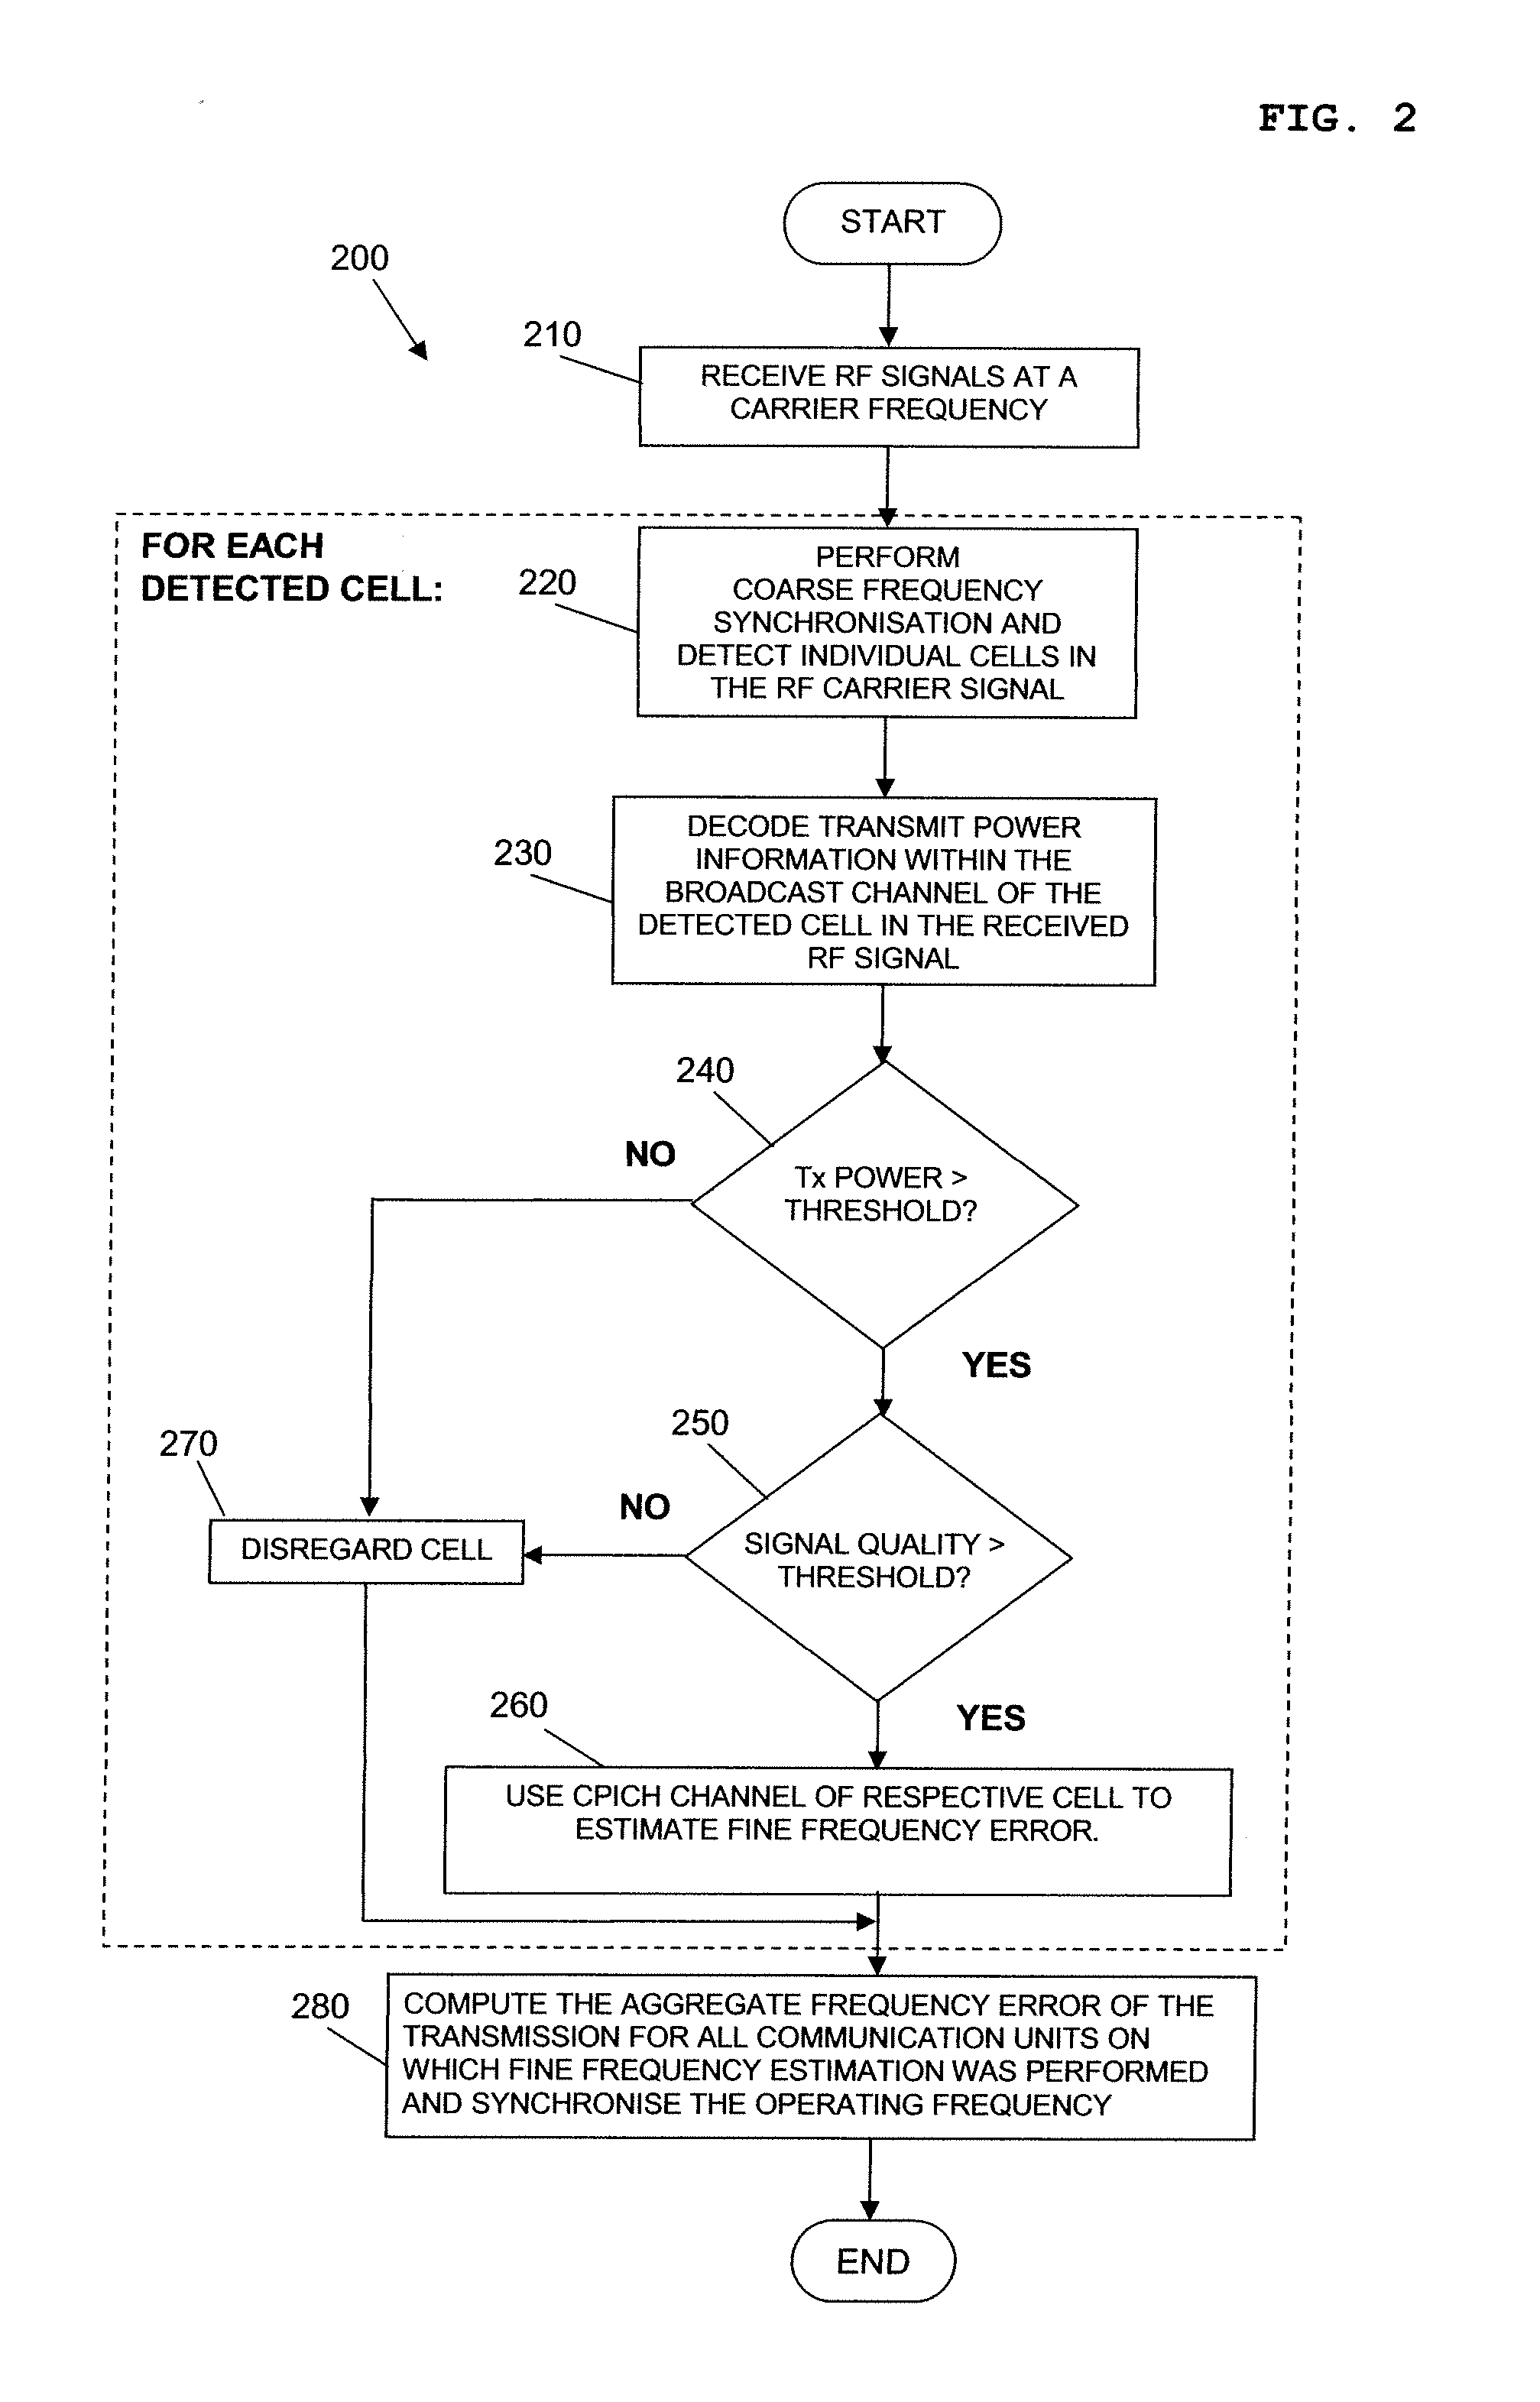 Communication unit and method for selective frequency synchronization in a cellular communication network